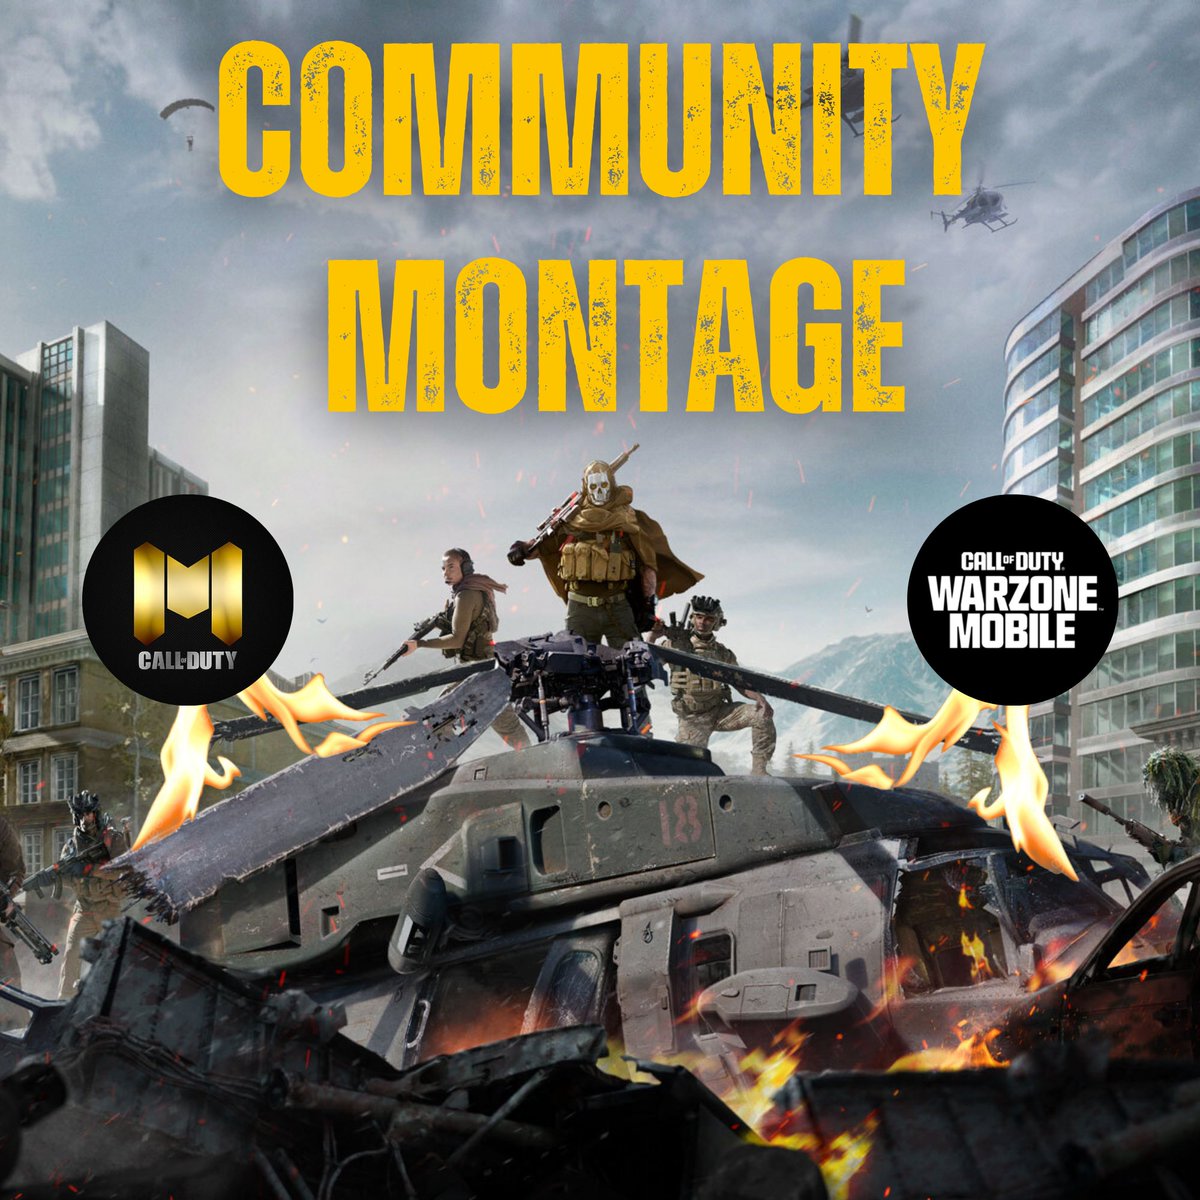 Comment your BEST clips from CODM or Warzone Mobile, I want to create a montage of the BEST community clips of all time. Like/retweet to help get this tweet more visibility. Thank you.